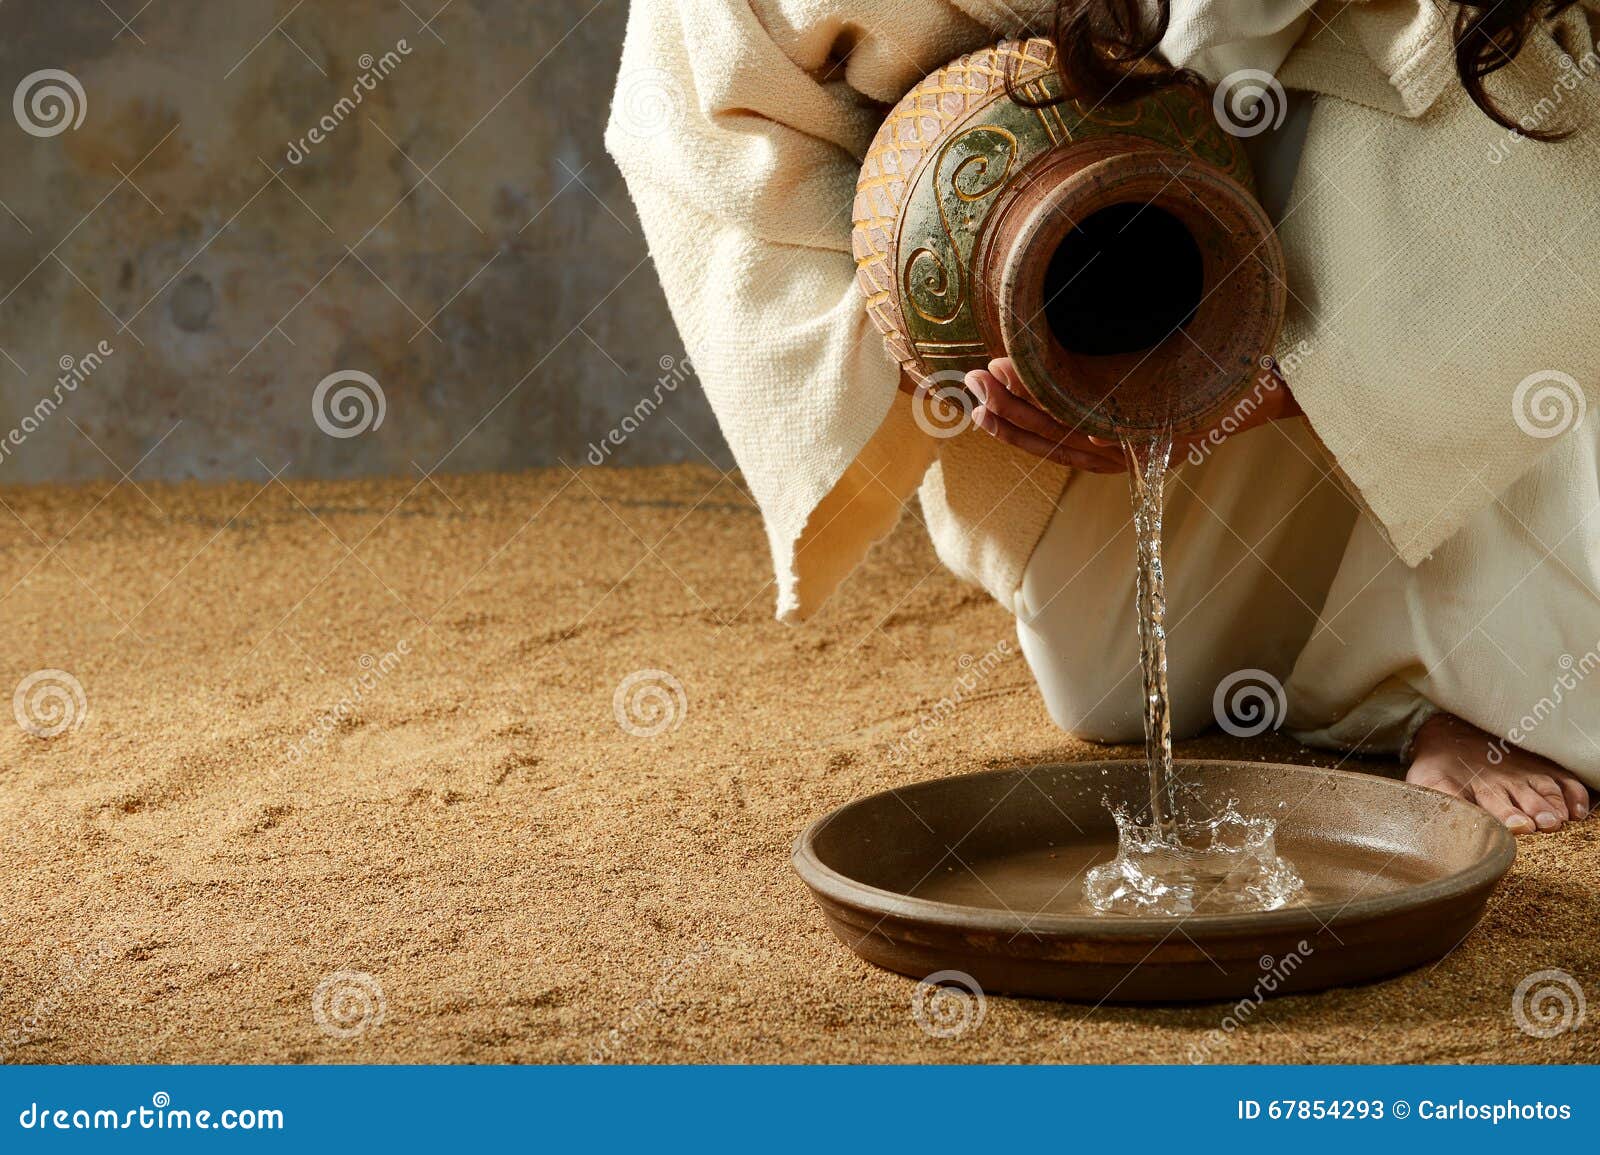 jesus pouring water from a jar